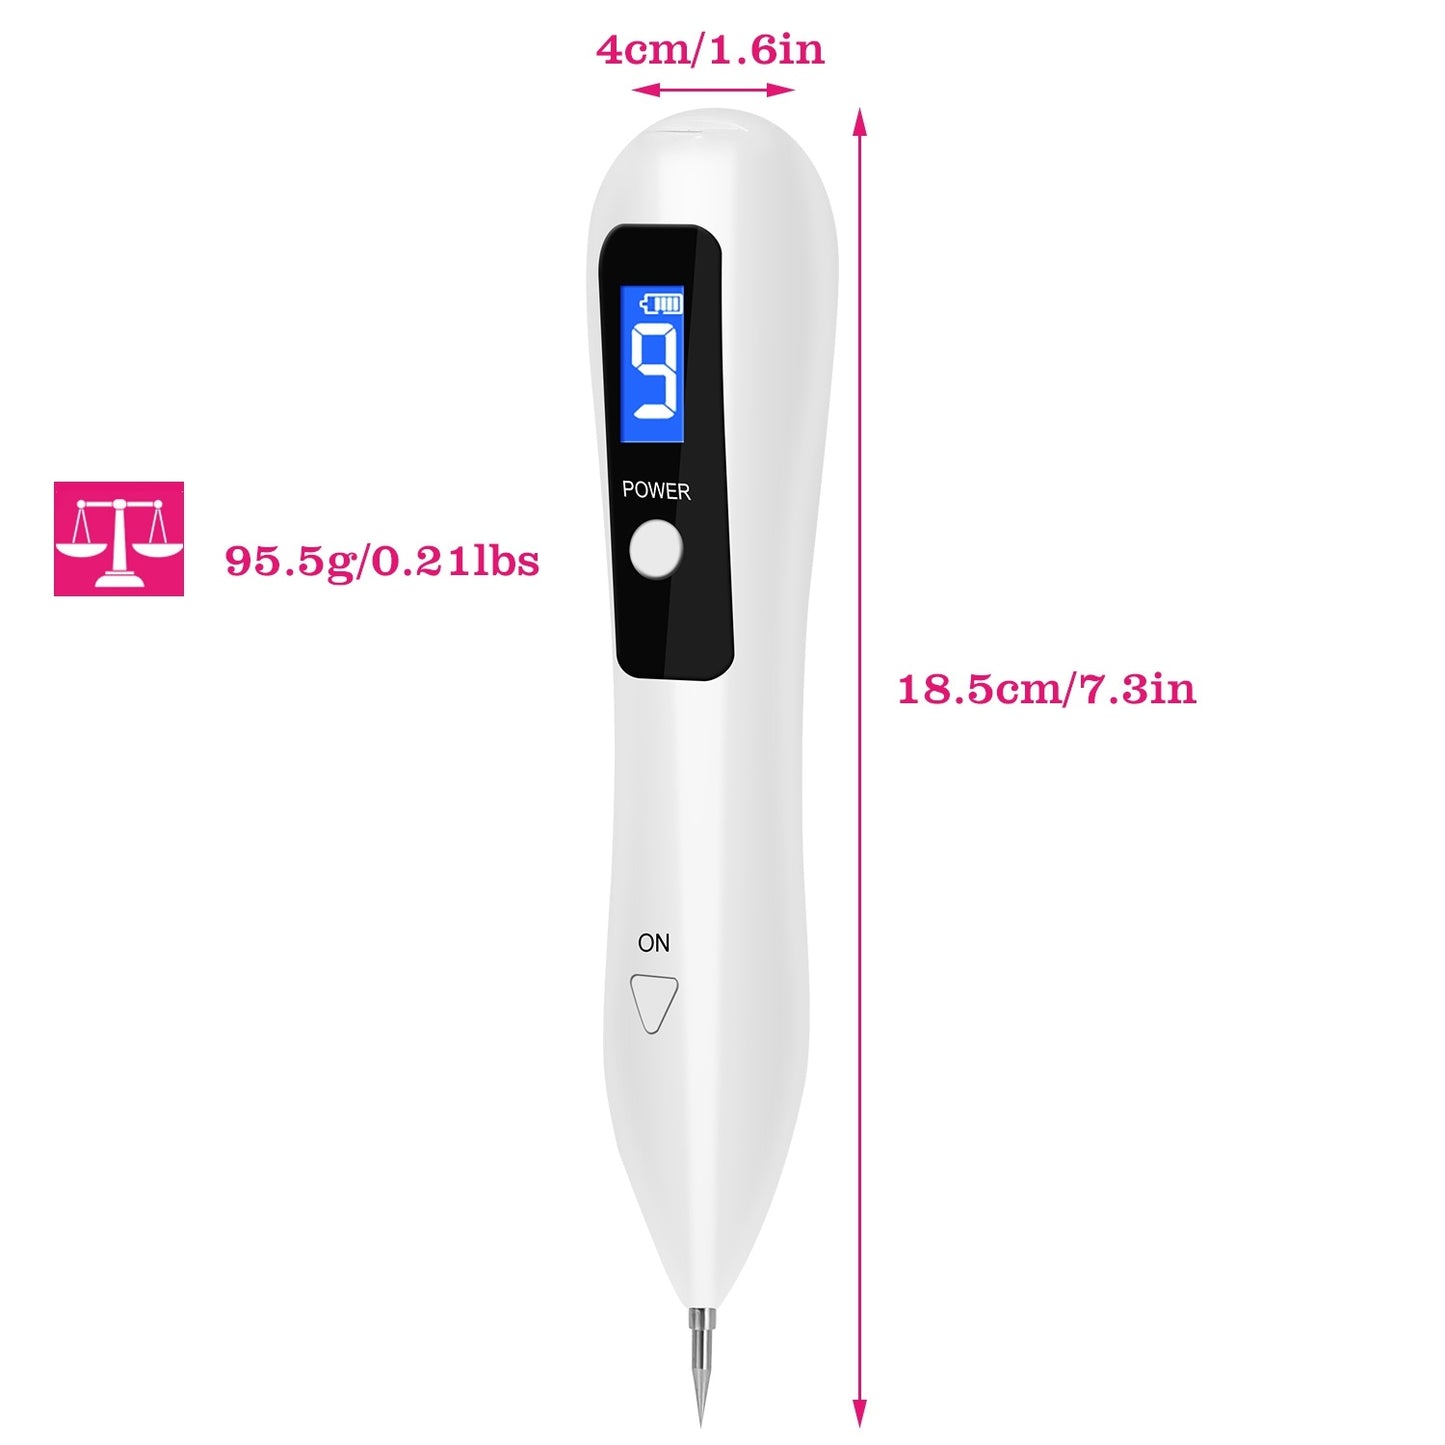 Skin Tag Repair Kit Portable Beauty Equipment Multi-Level with Home Usage USB Charging LCD Level Adjustable 6 Replaceable Needles